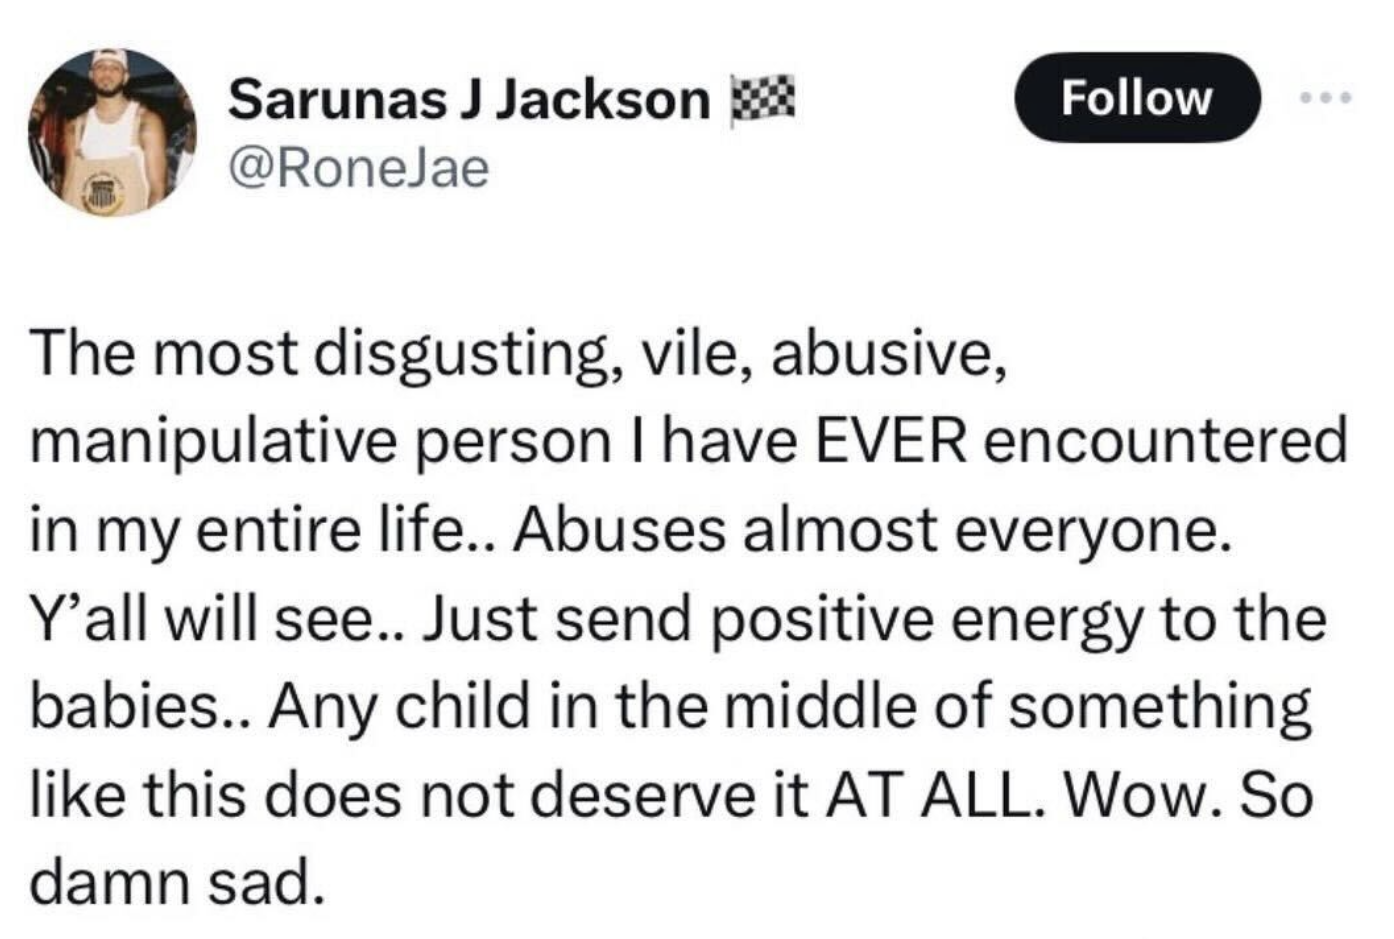 Screenshot of the tweet, starting with &quot;The most disgusting, vile, abusive, manipulative person I have EVER encountered in my entire life. Abuses almost everyone. Y&#x27;all will see...&quot;